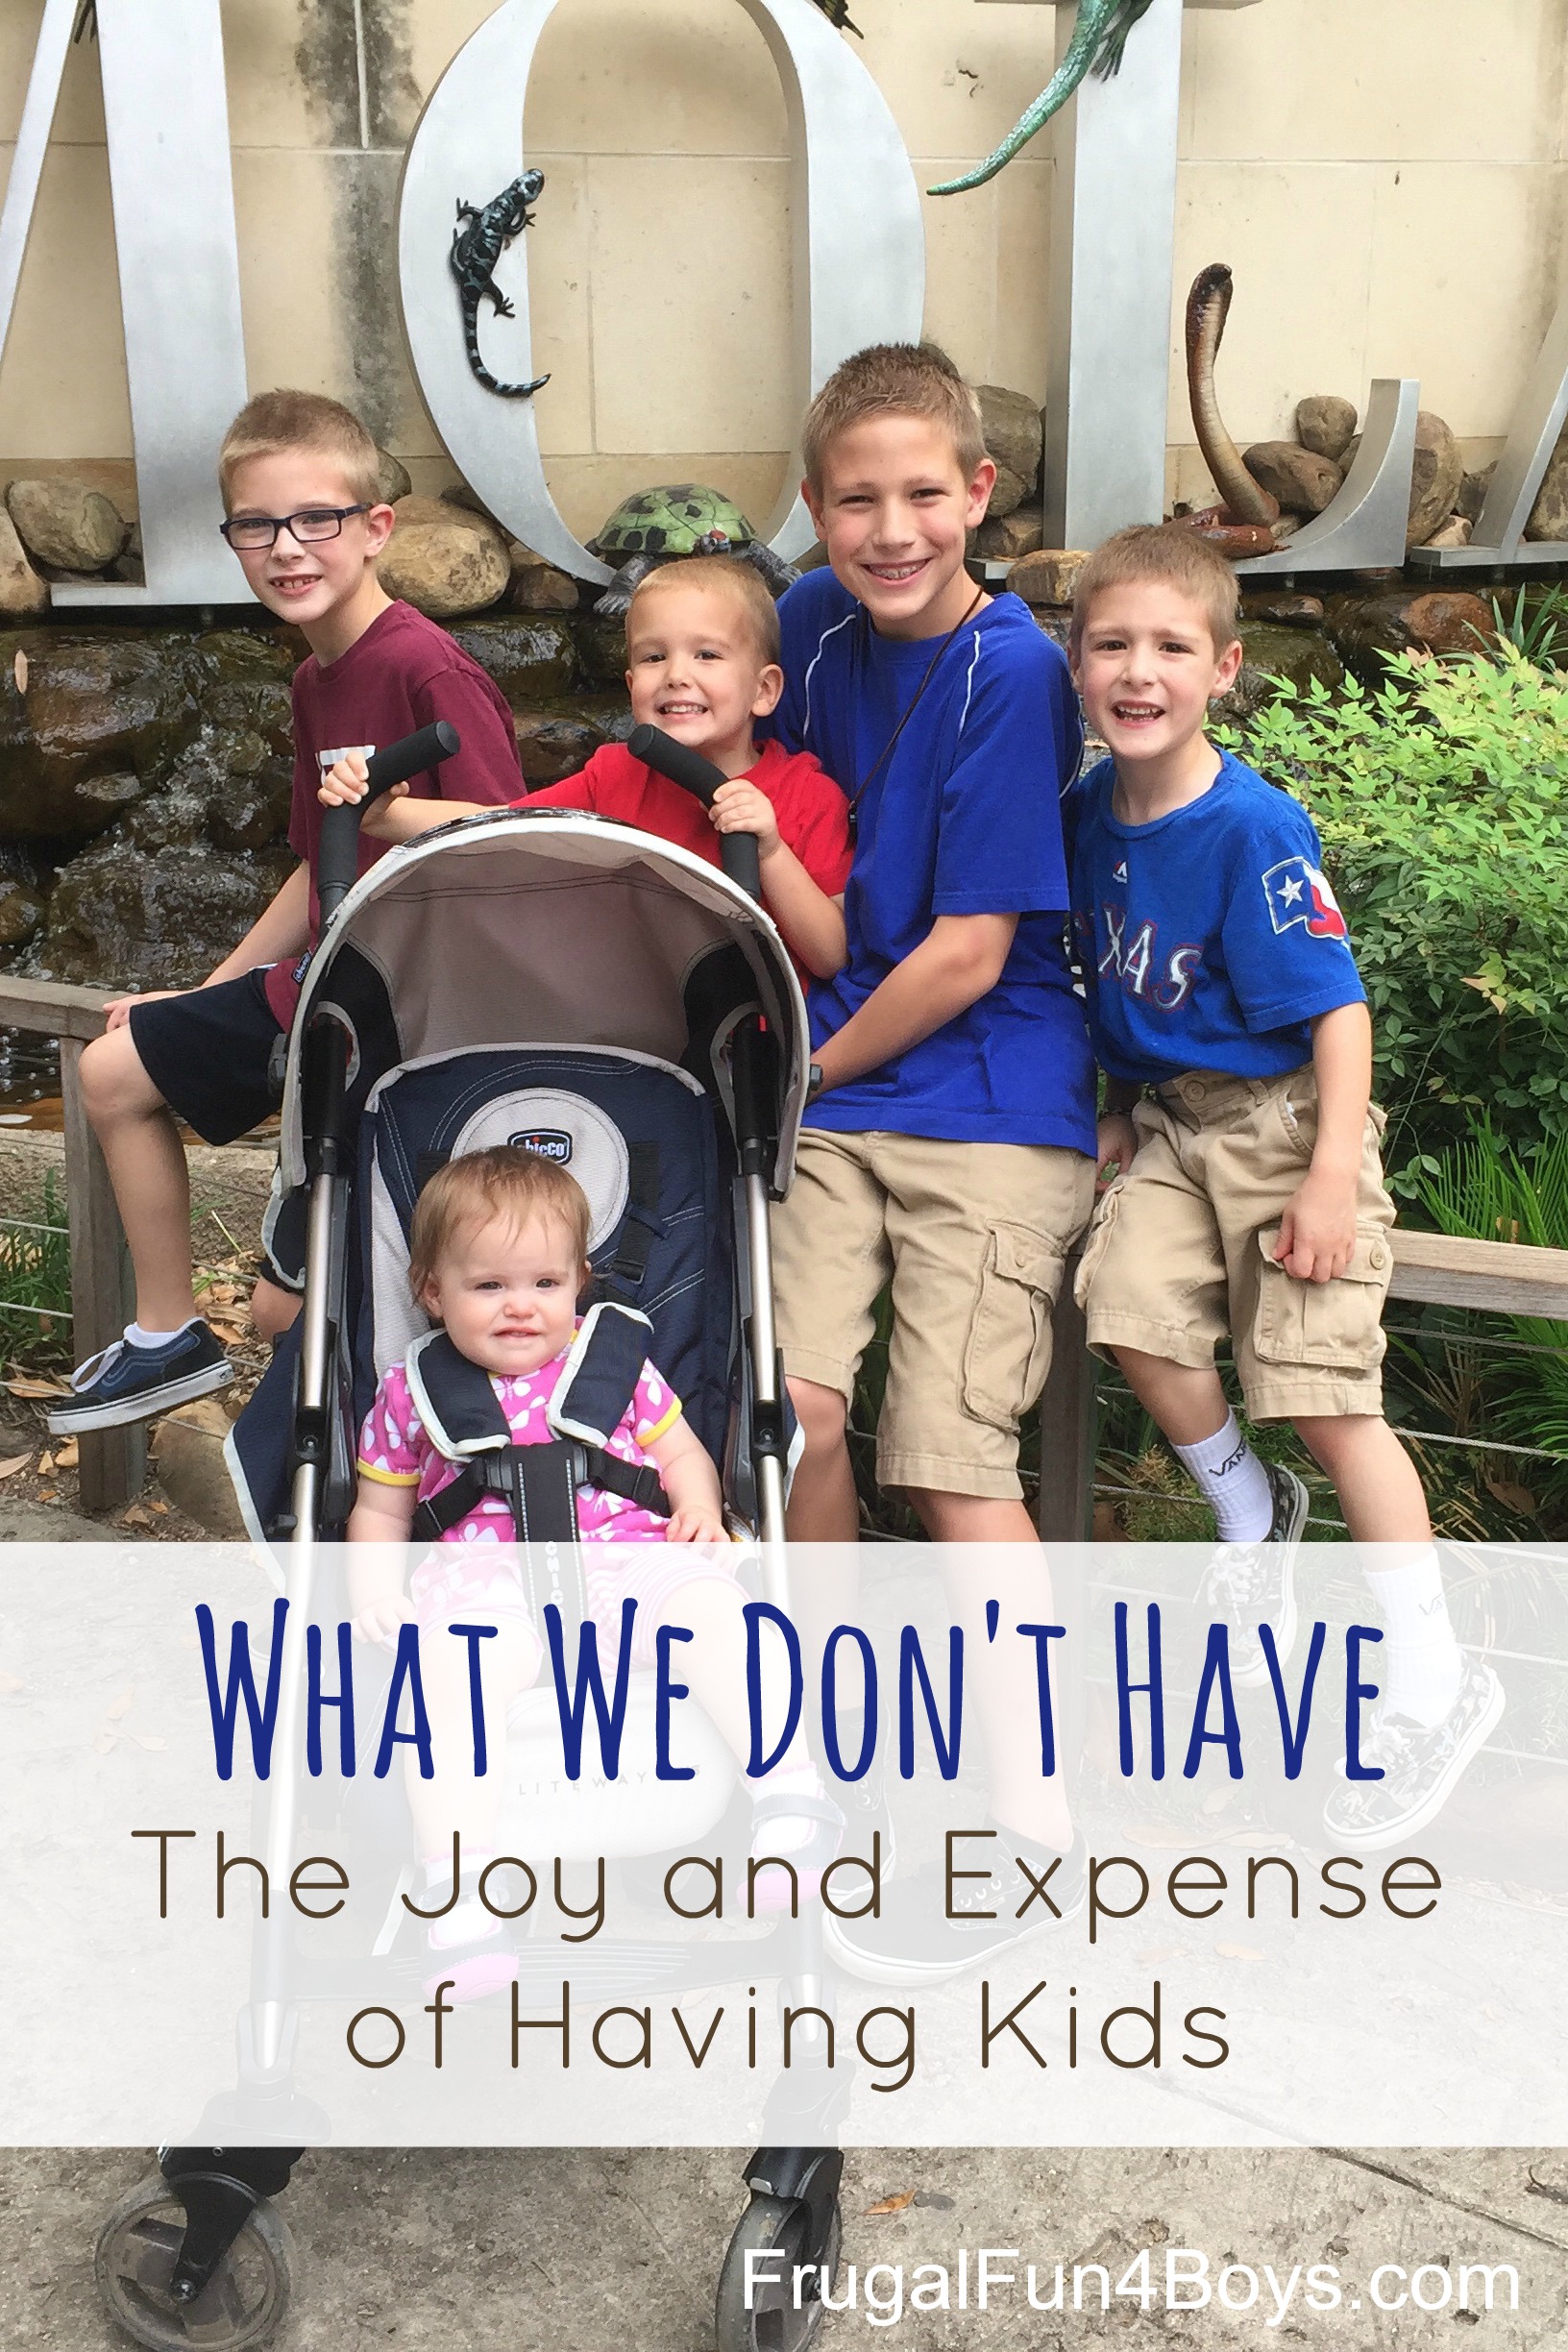 What We Don't Have: The Joy and Expense of Having Kids